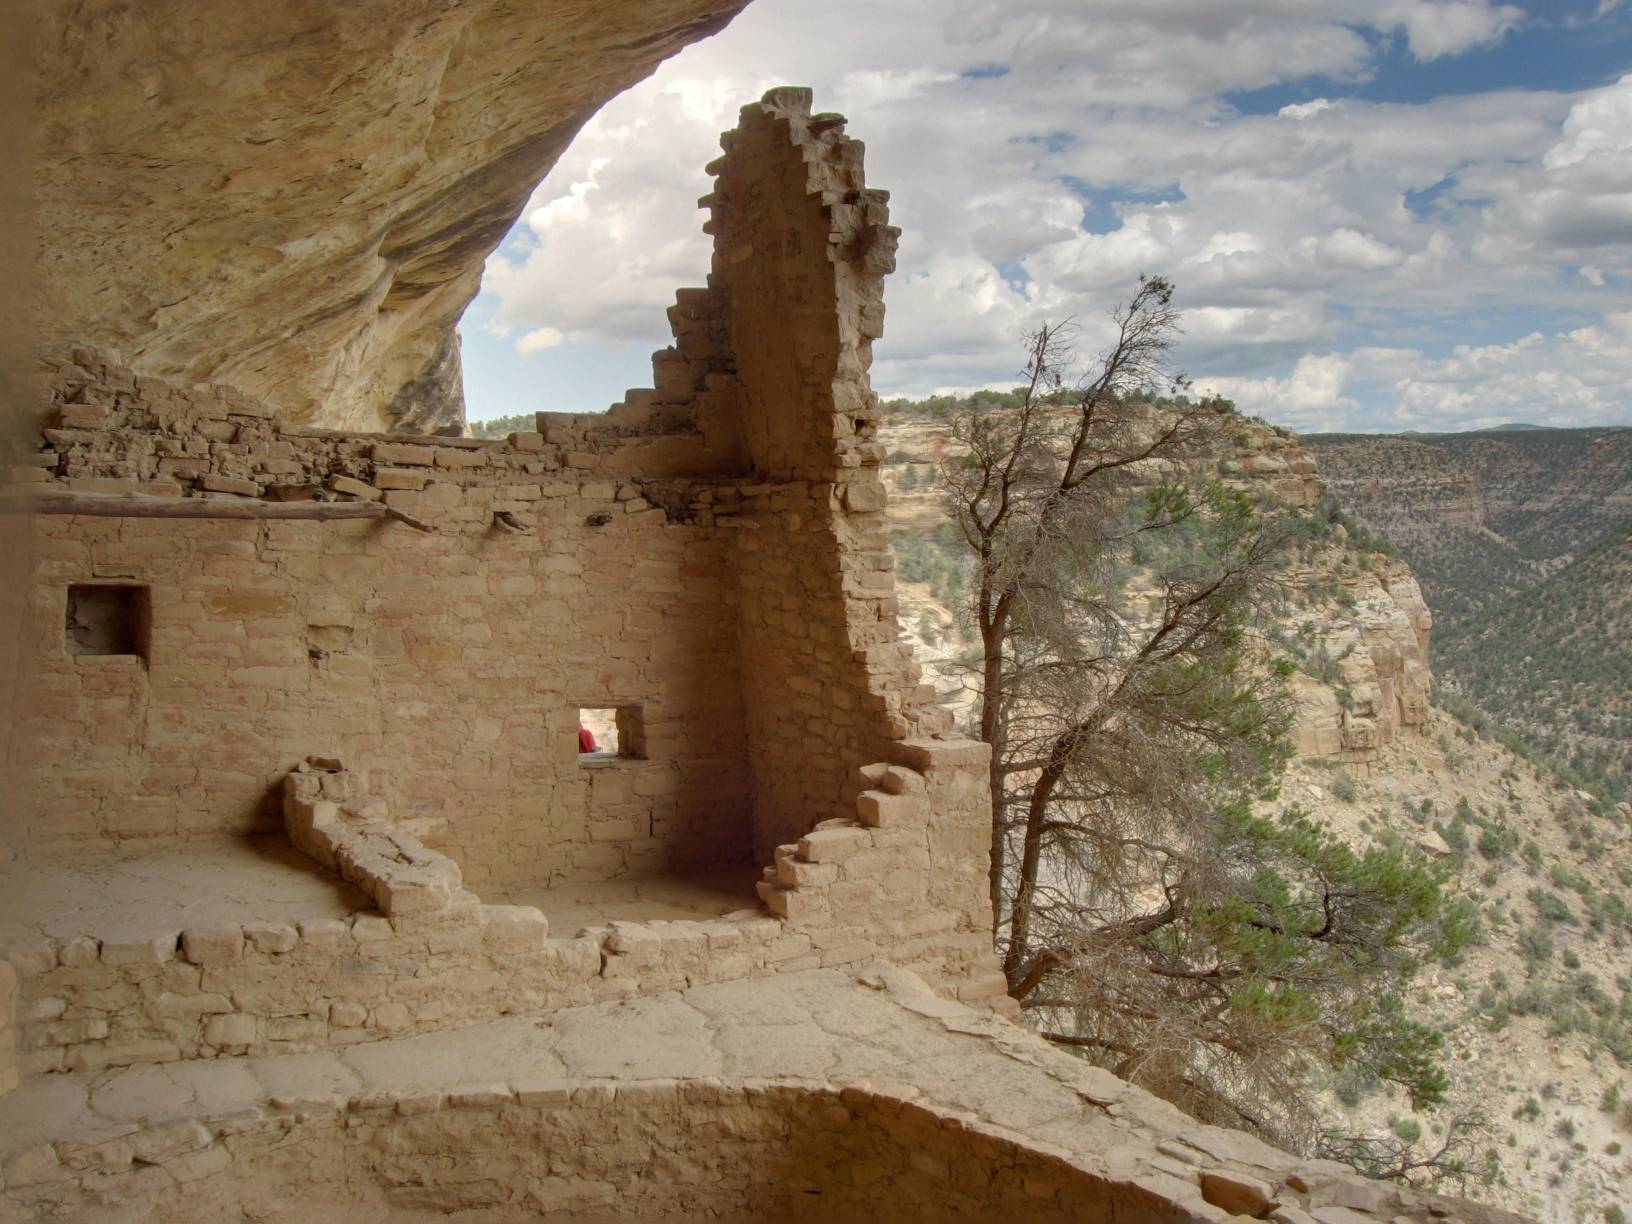 Image: A building in the southern part of the Balcony House cliff dwelling complex